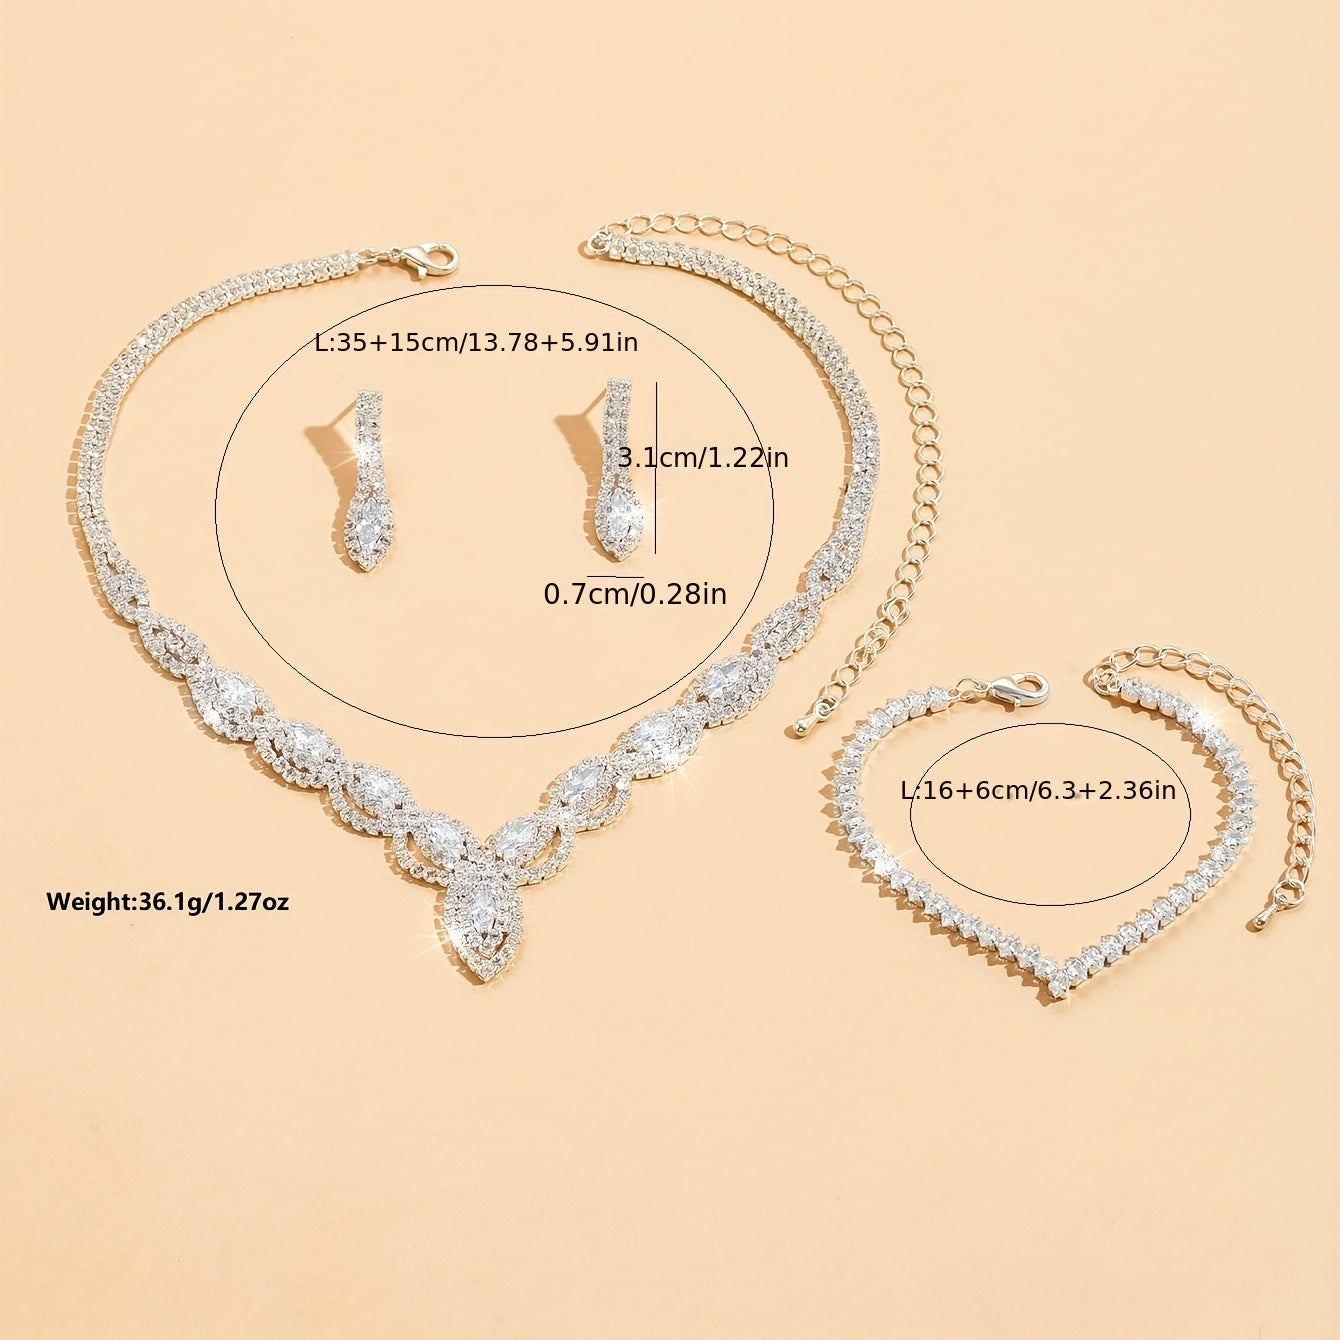 4pcs Earrings Necklace Plus Bracelet Elegant Jewelry Set Silver Plated Inlaid Rhinestone Engagement Wedding Jewelry For Female Dainty Birthday Gift For Your Girl